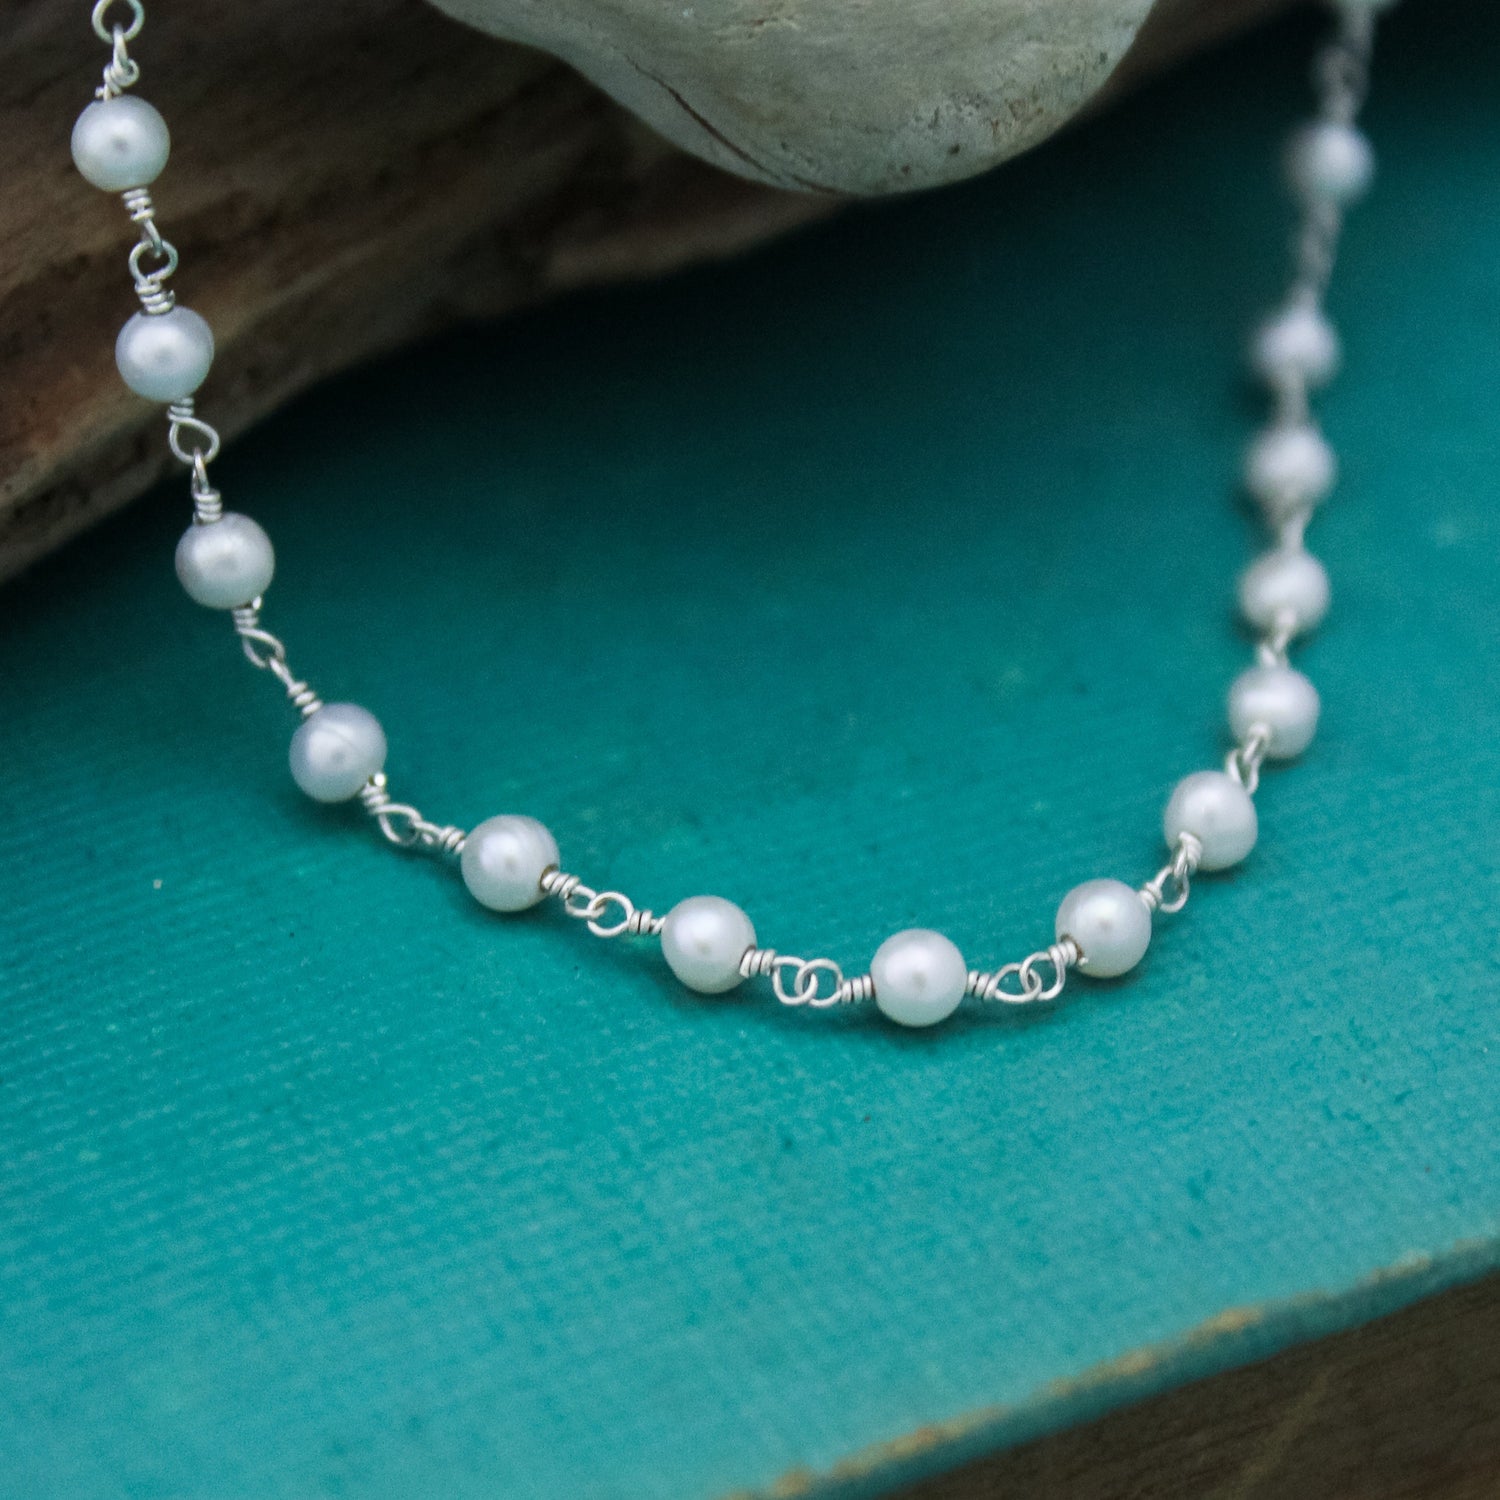 Pearl Chain Anklet, June Birthday Gift, Birthstone Jewelry, Pearl Jewelry, Sterling Silver Anklet, Gifts for Her, Summer Cruise Jewelry